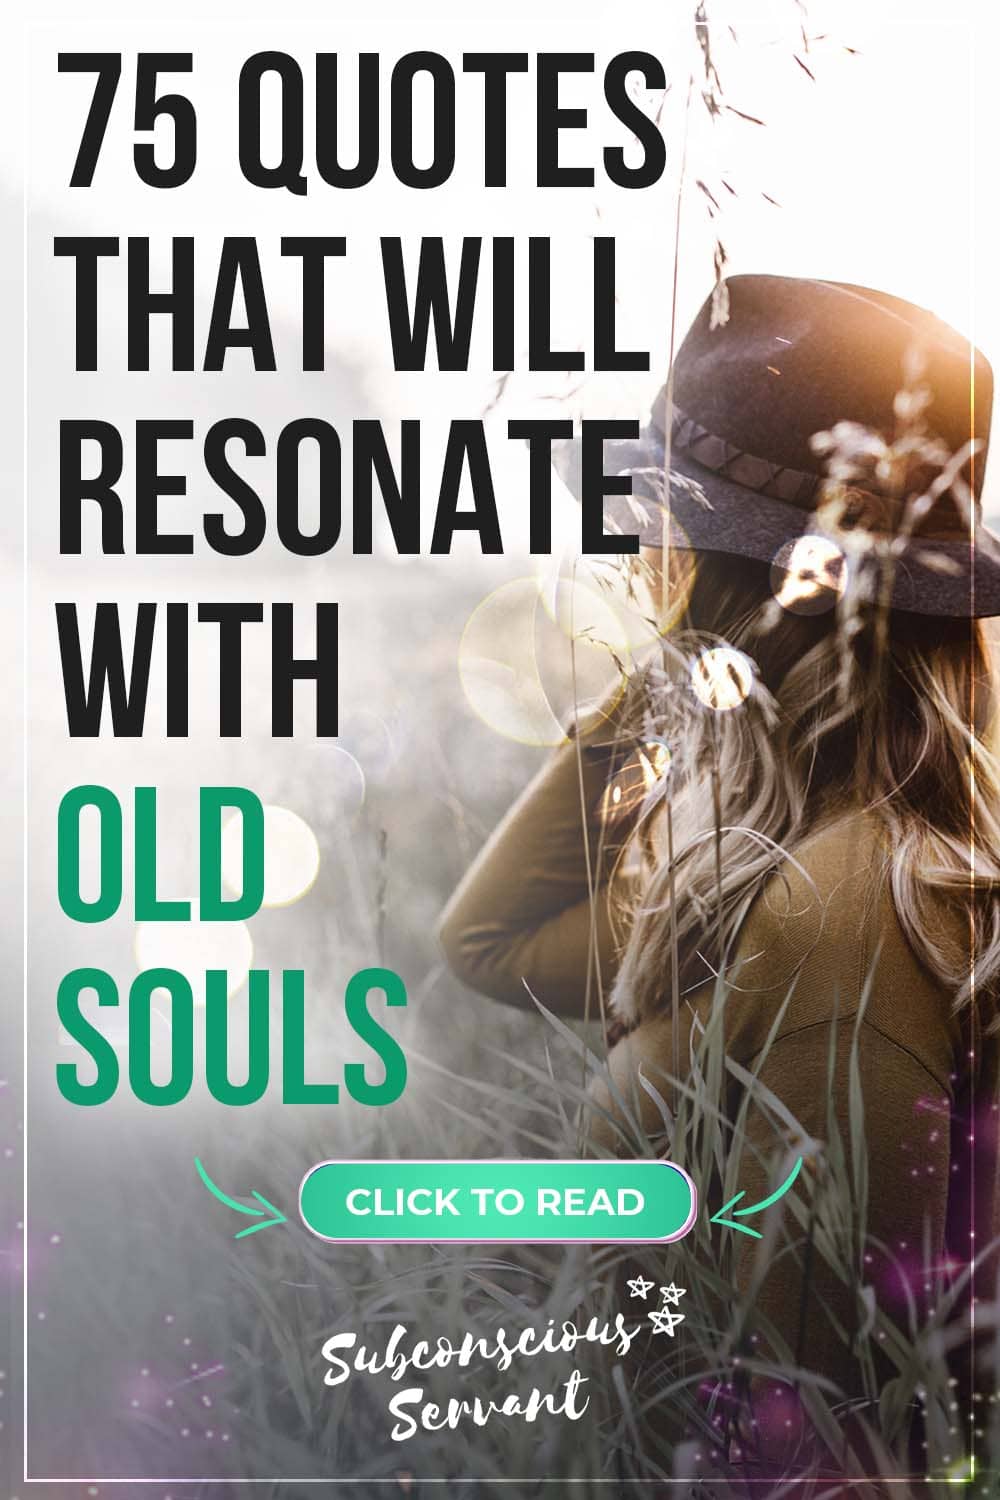 75 Old Soul Quotes (With Shareable Images)